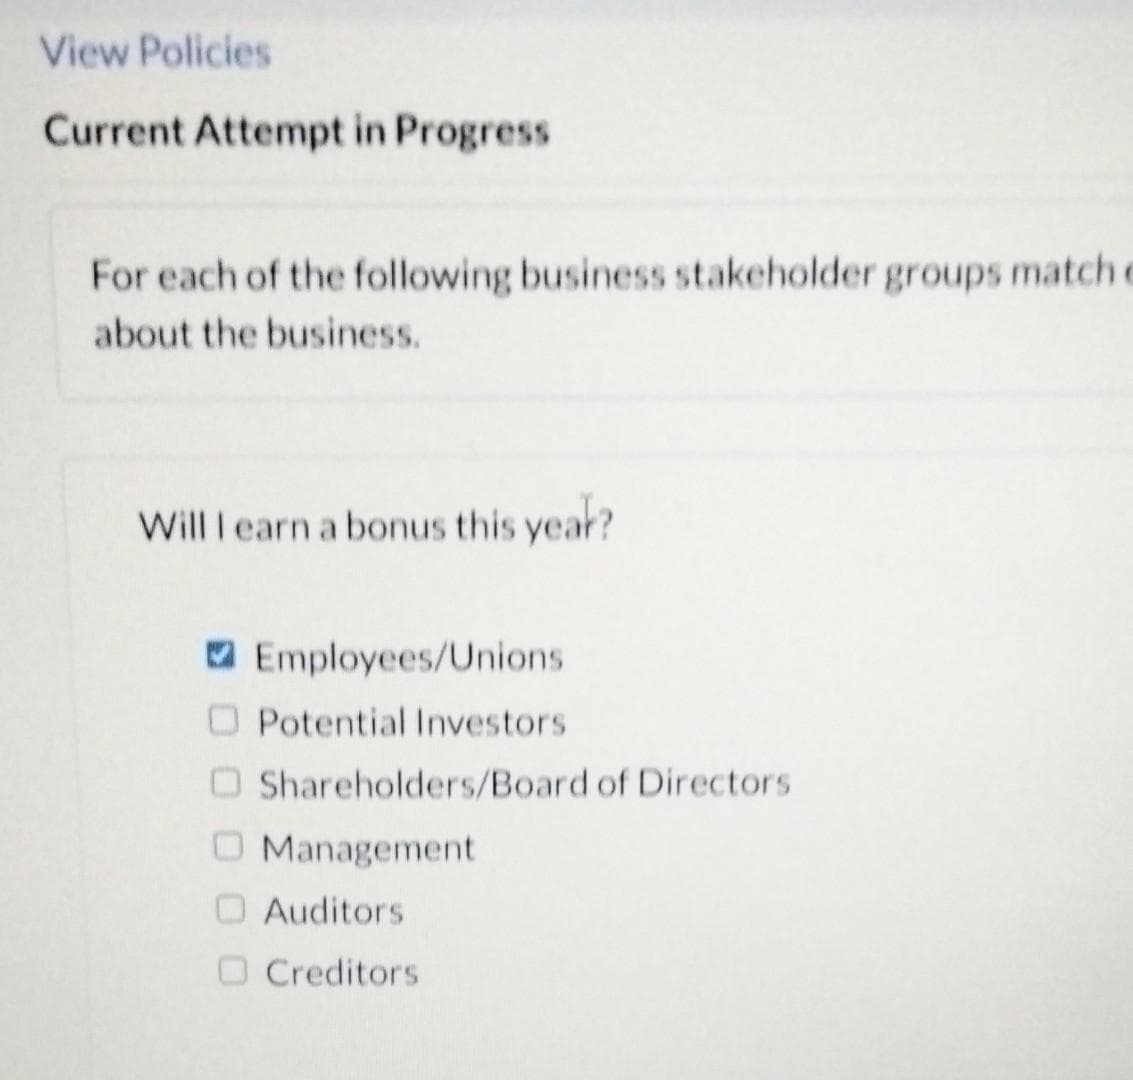 View Policies
Current Attempt in Progress
For each of the following business stakeholder groups match e
about the business.
Will I earn a bonus this year?
O Employees/Unions
O Potential Investors
O Shareholders/Board of Directors
O Management
O Auditors
O Creditors
